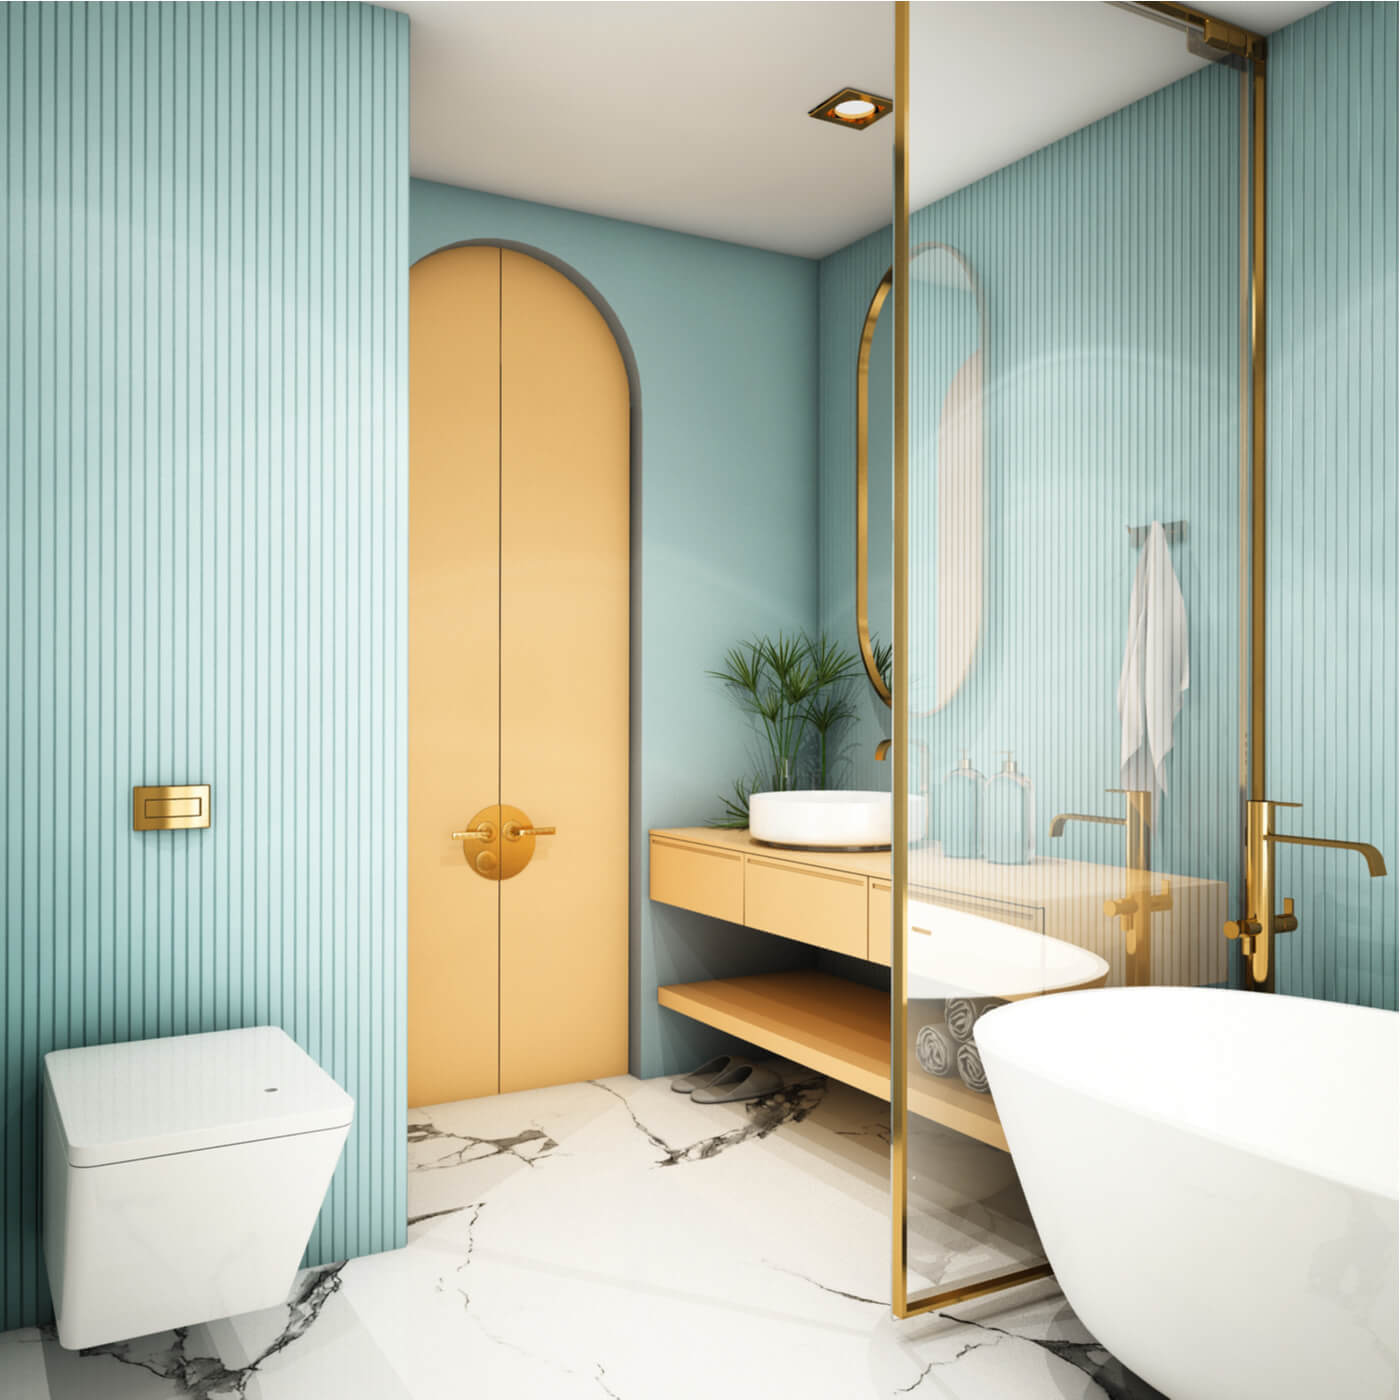 Your bathrooms will love the gold